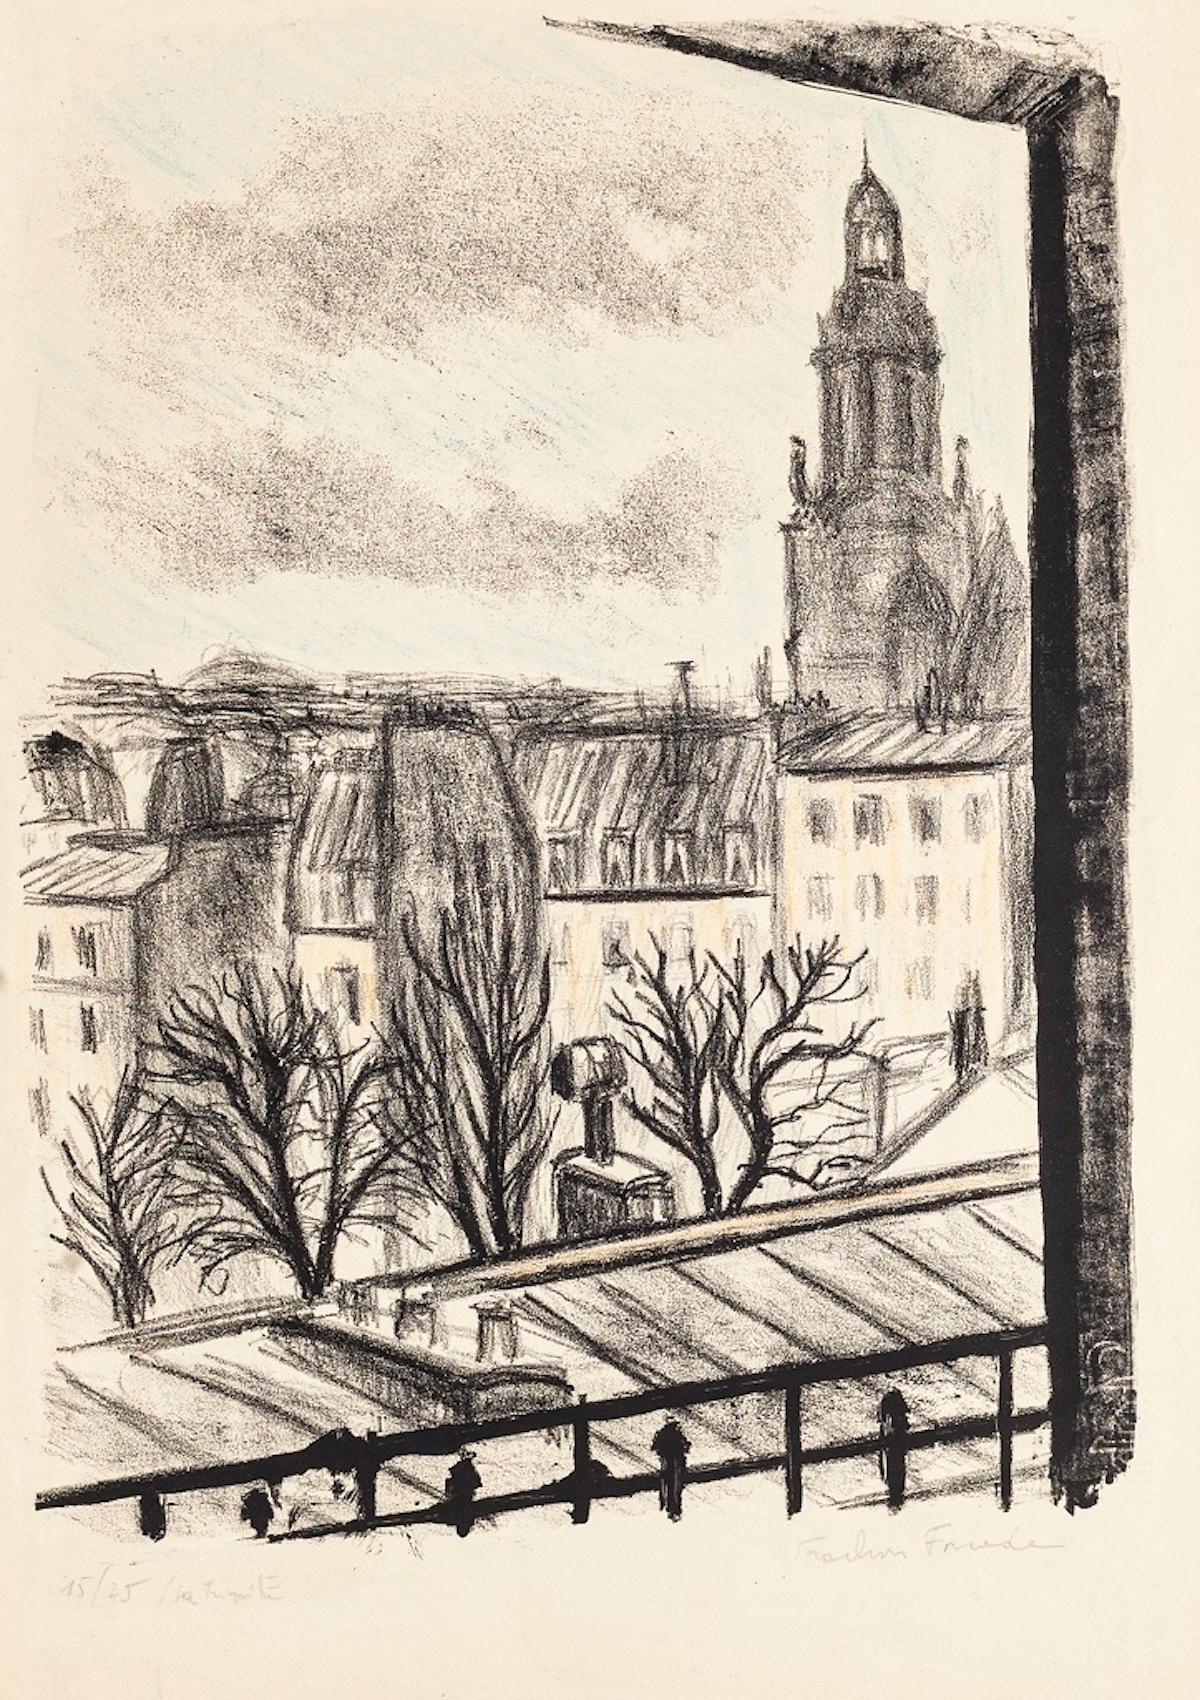 Paris Landscape is an original modern artwork realized by the French artist Pierre Frachon-Forcade in the middle of the XX Century. 

Original Lithograph on paper. 

Hand-signed by the artist on the lower right corner in pencil: Frachon